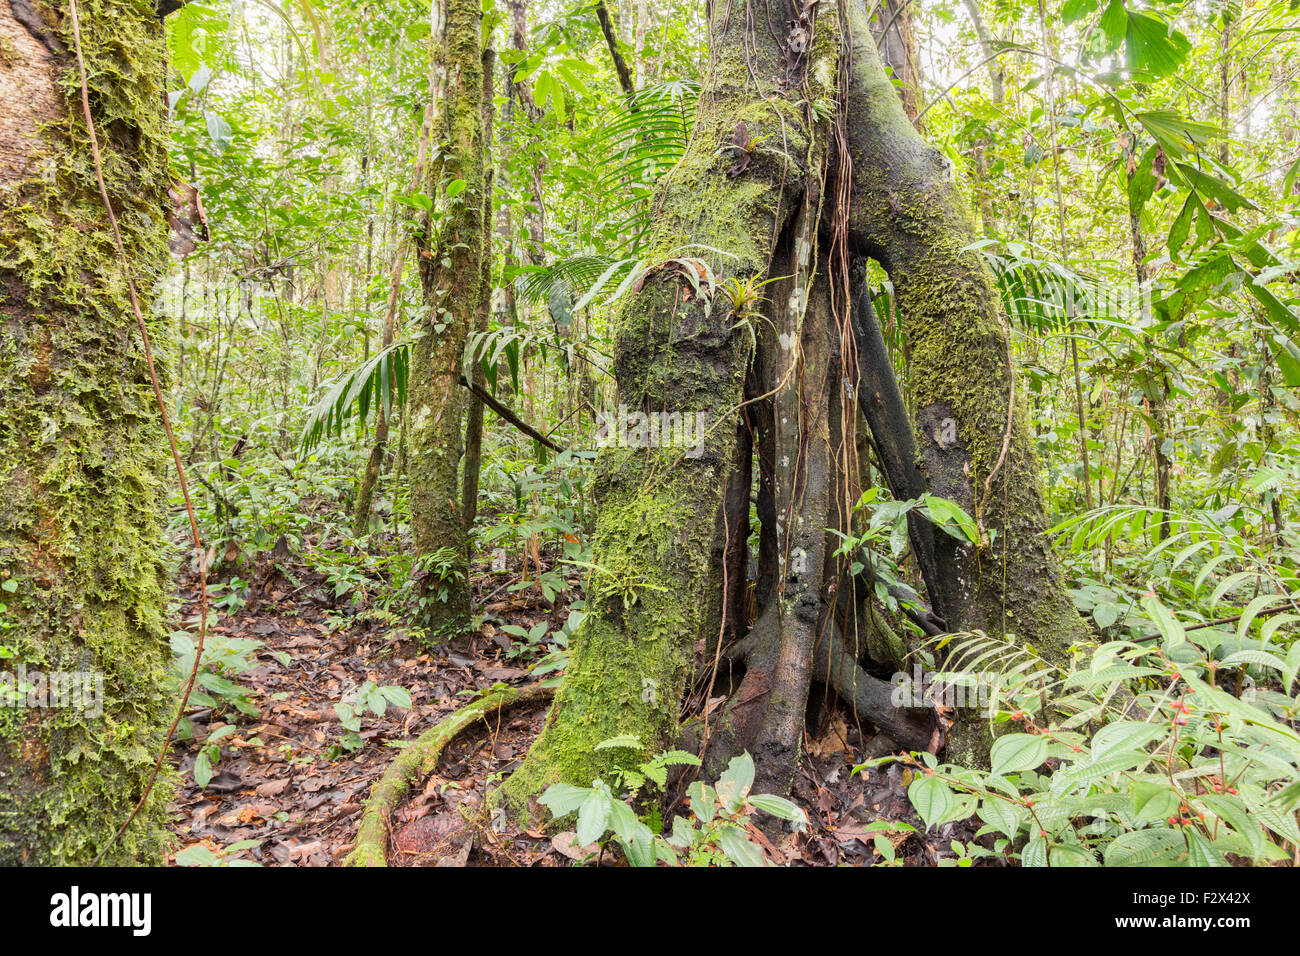 Tree with stilt roots in the Ecuadorian Amazon. HDR image Stock Photo